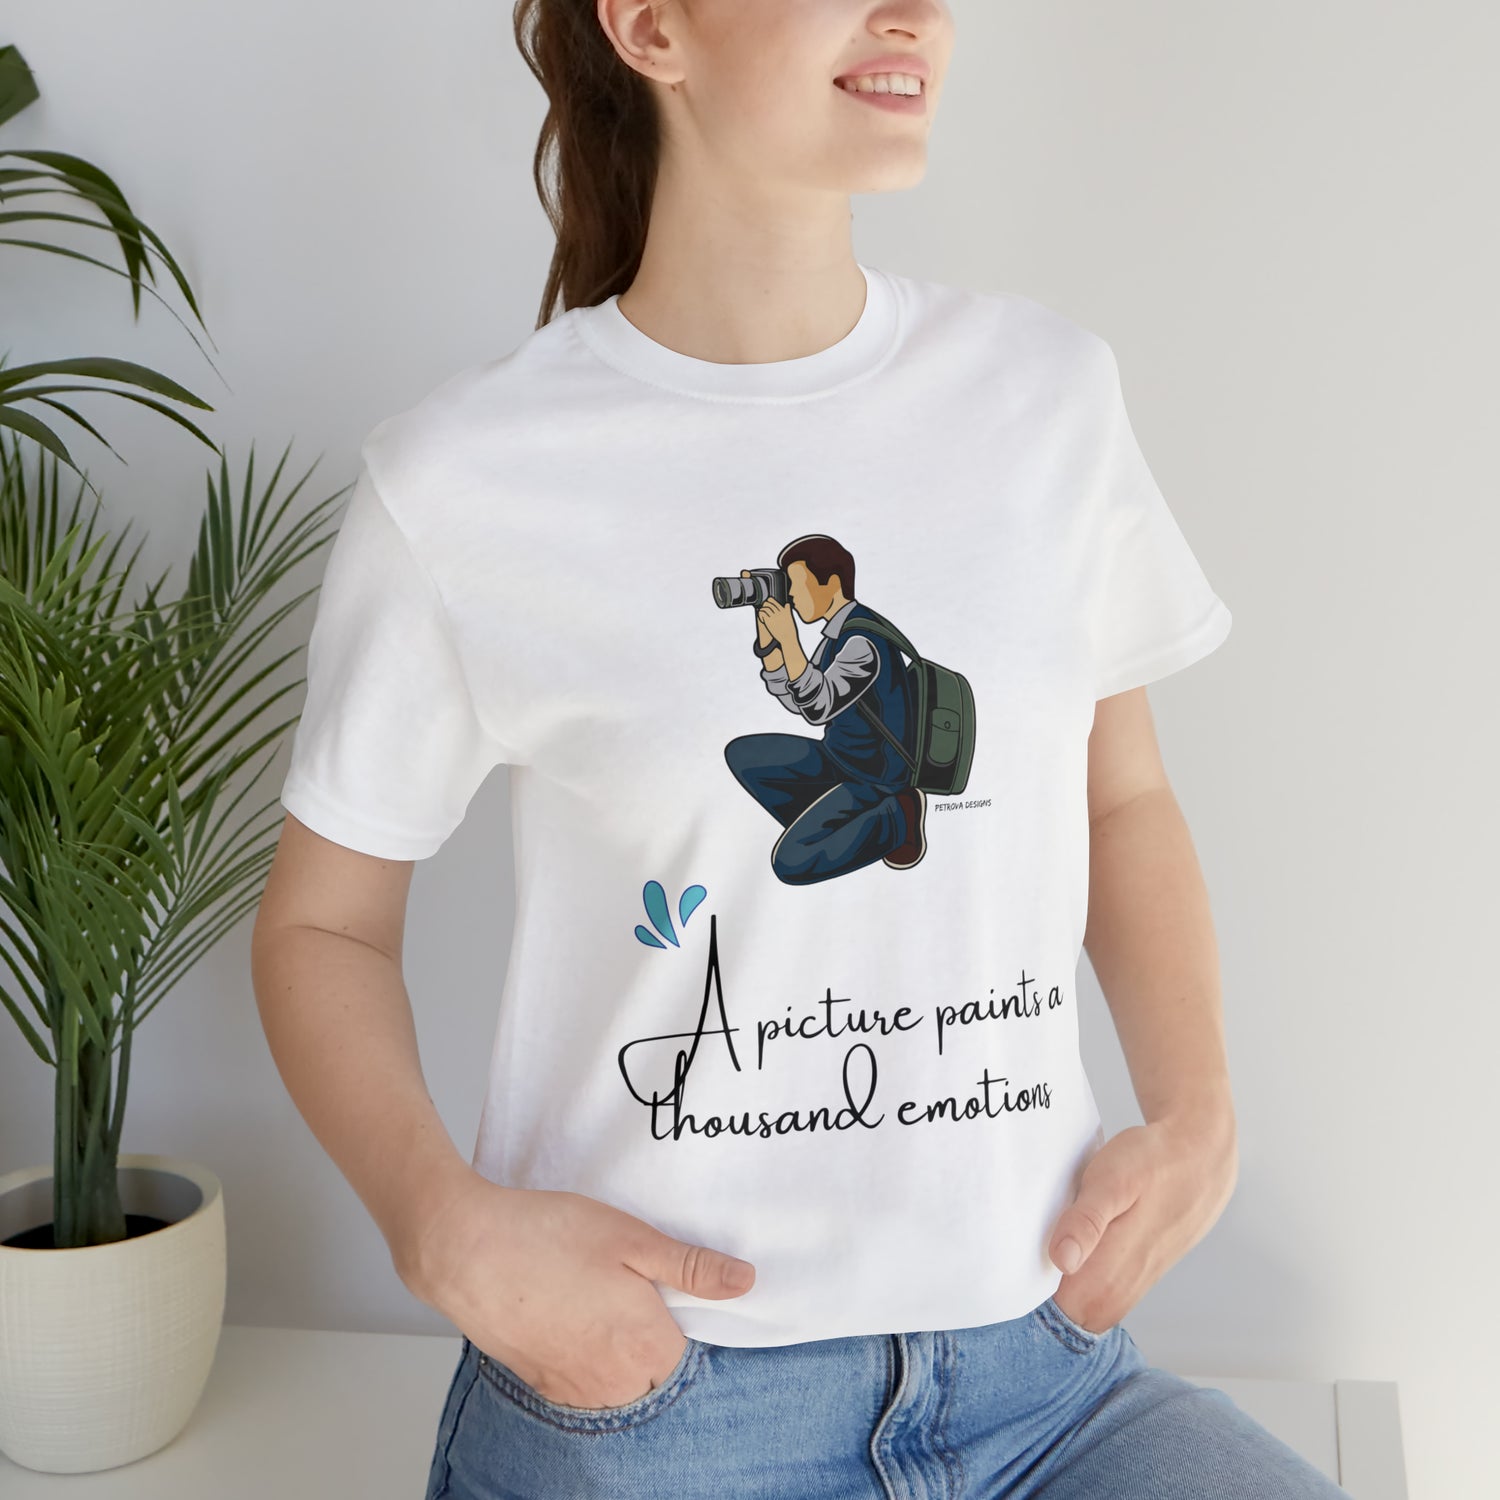 T-Shirt For Photographer | Photography Tee White T-Shirt Petrova Designs